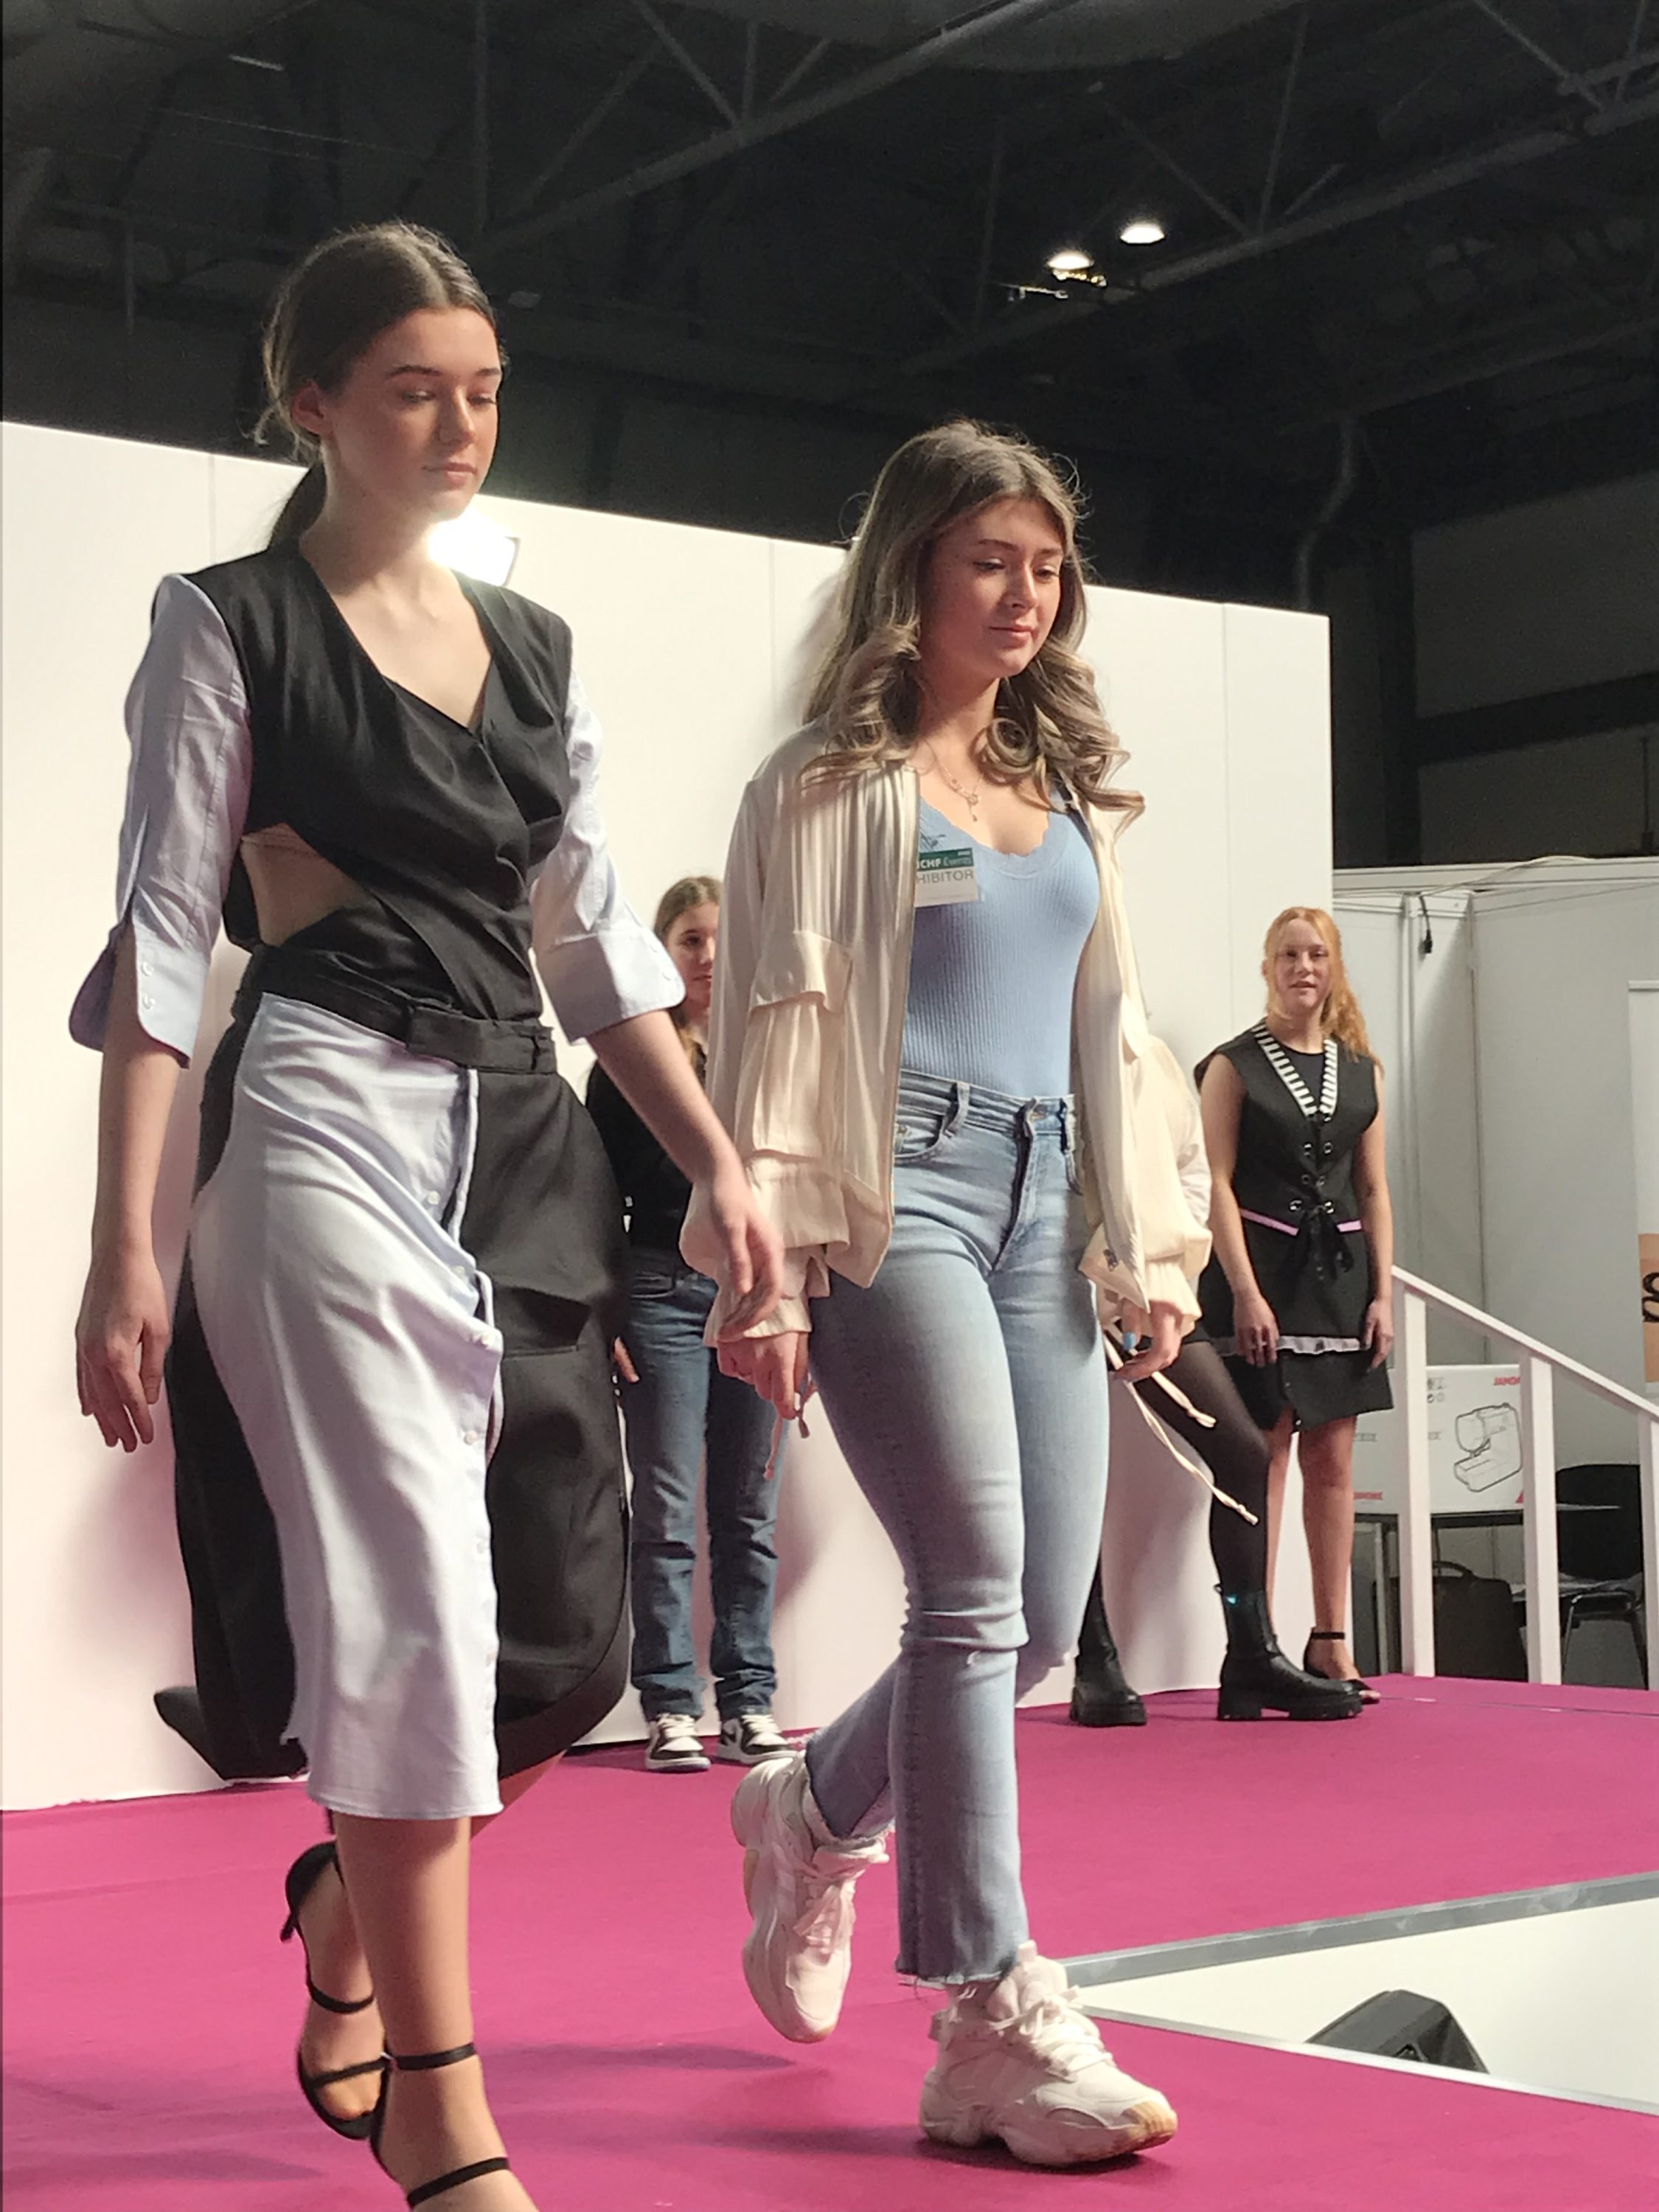 Emily accompanying her modelled garment on the catwalk at NEC